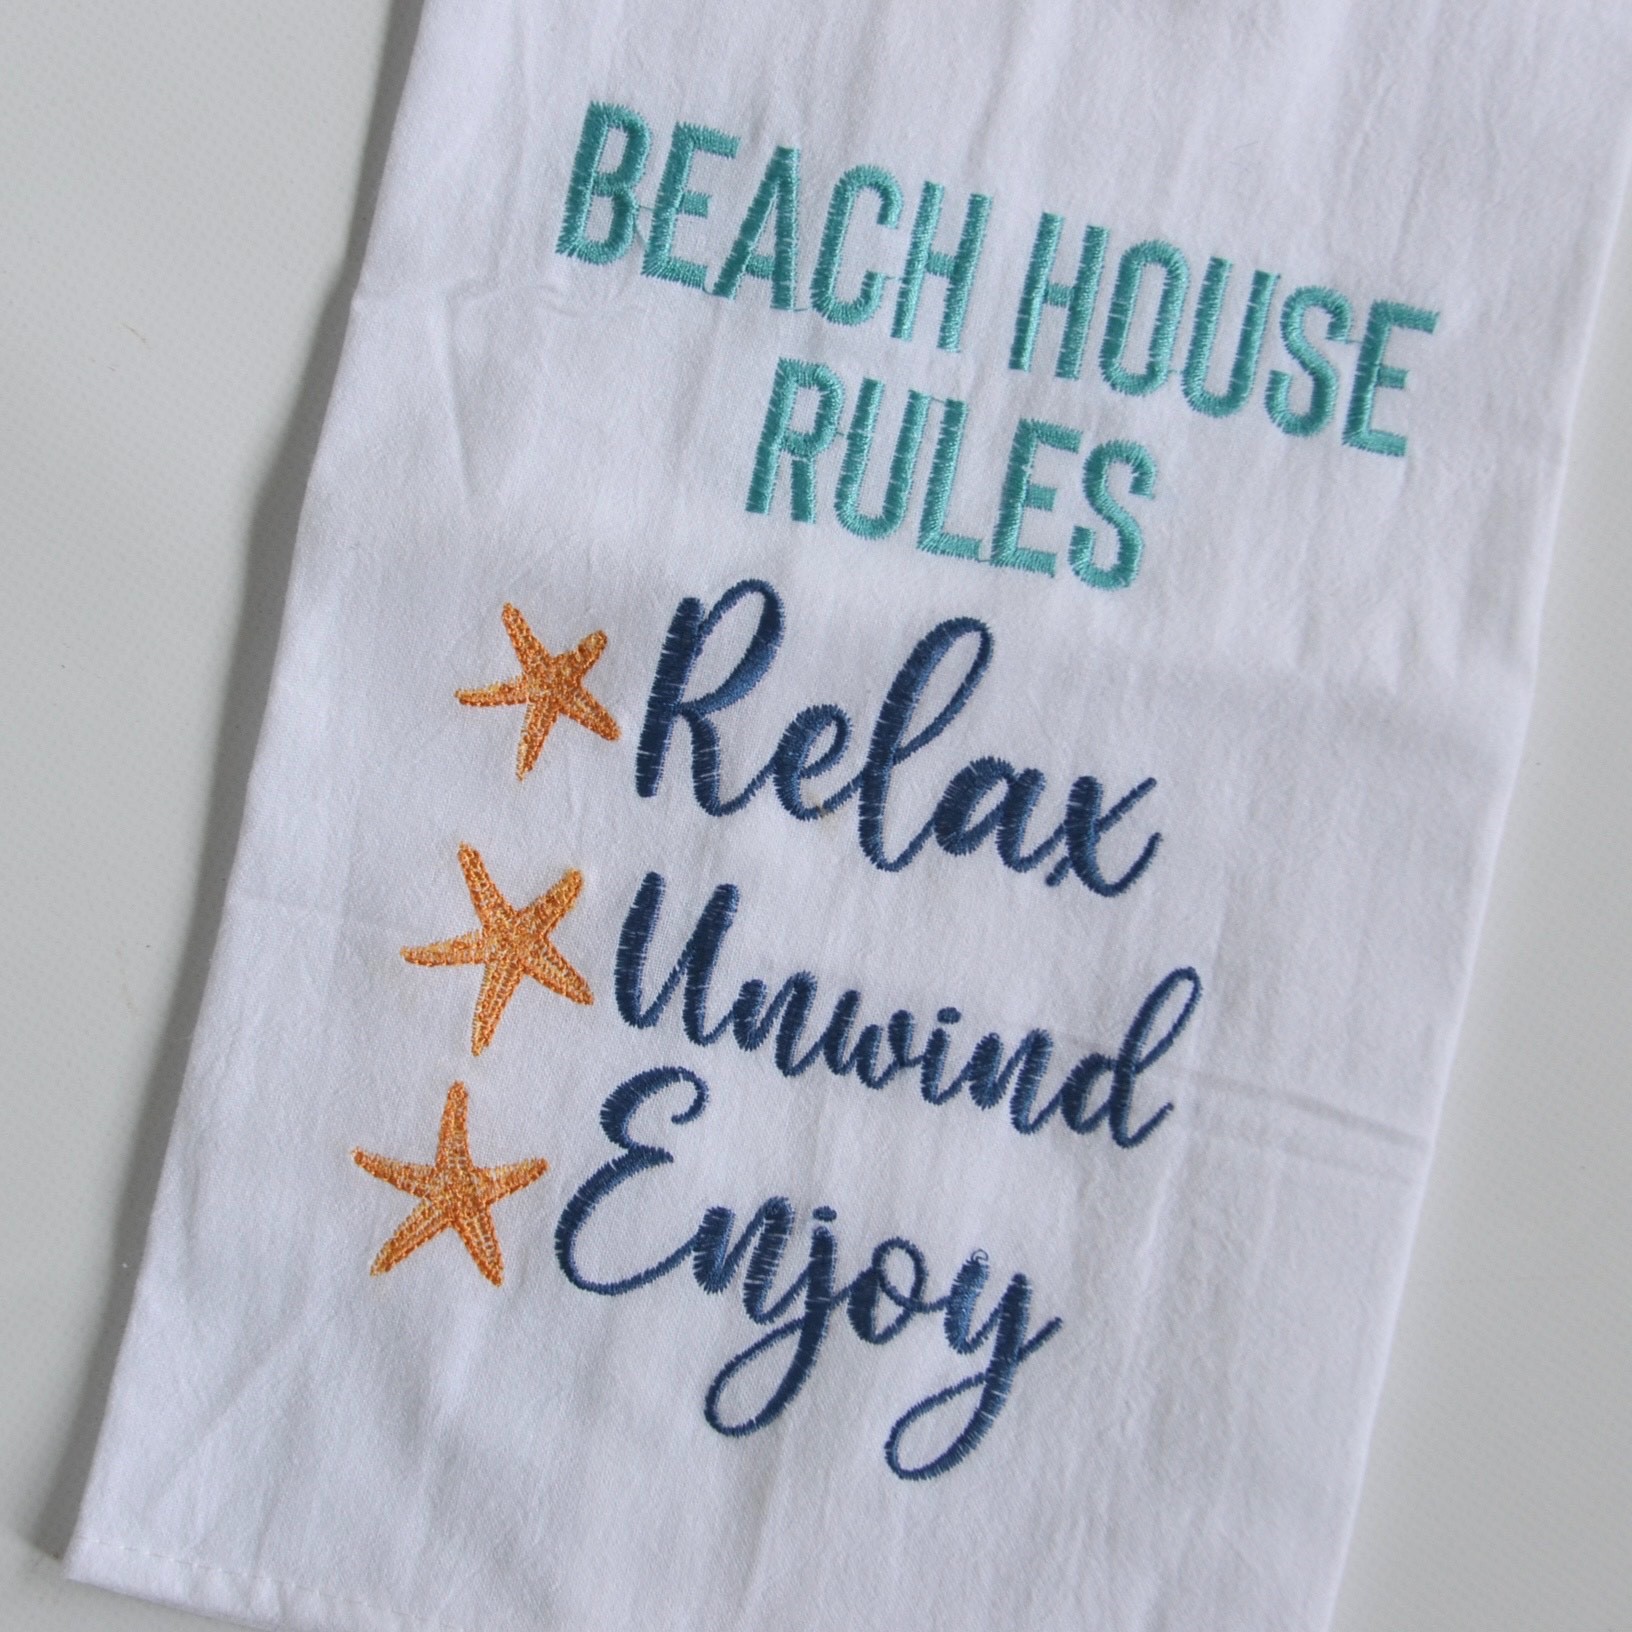 Paperless Cloth Kitchen Towels / dinner Napkins / Beach House